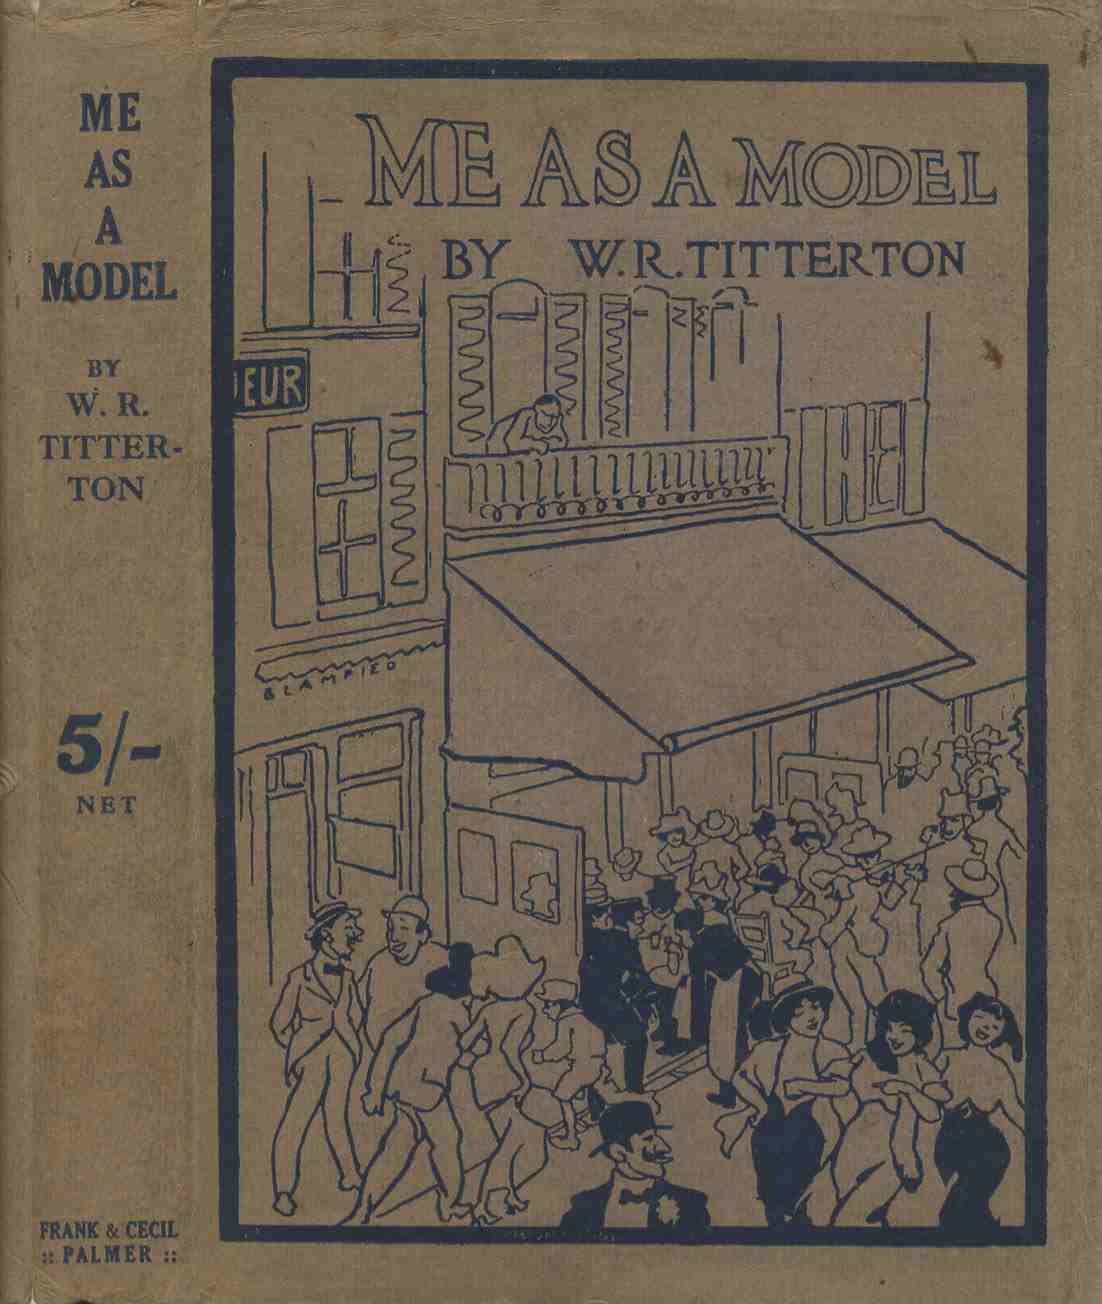 Small image of cover of book